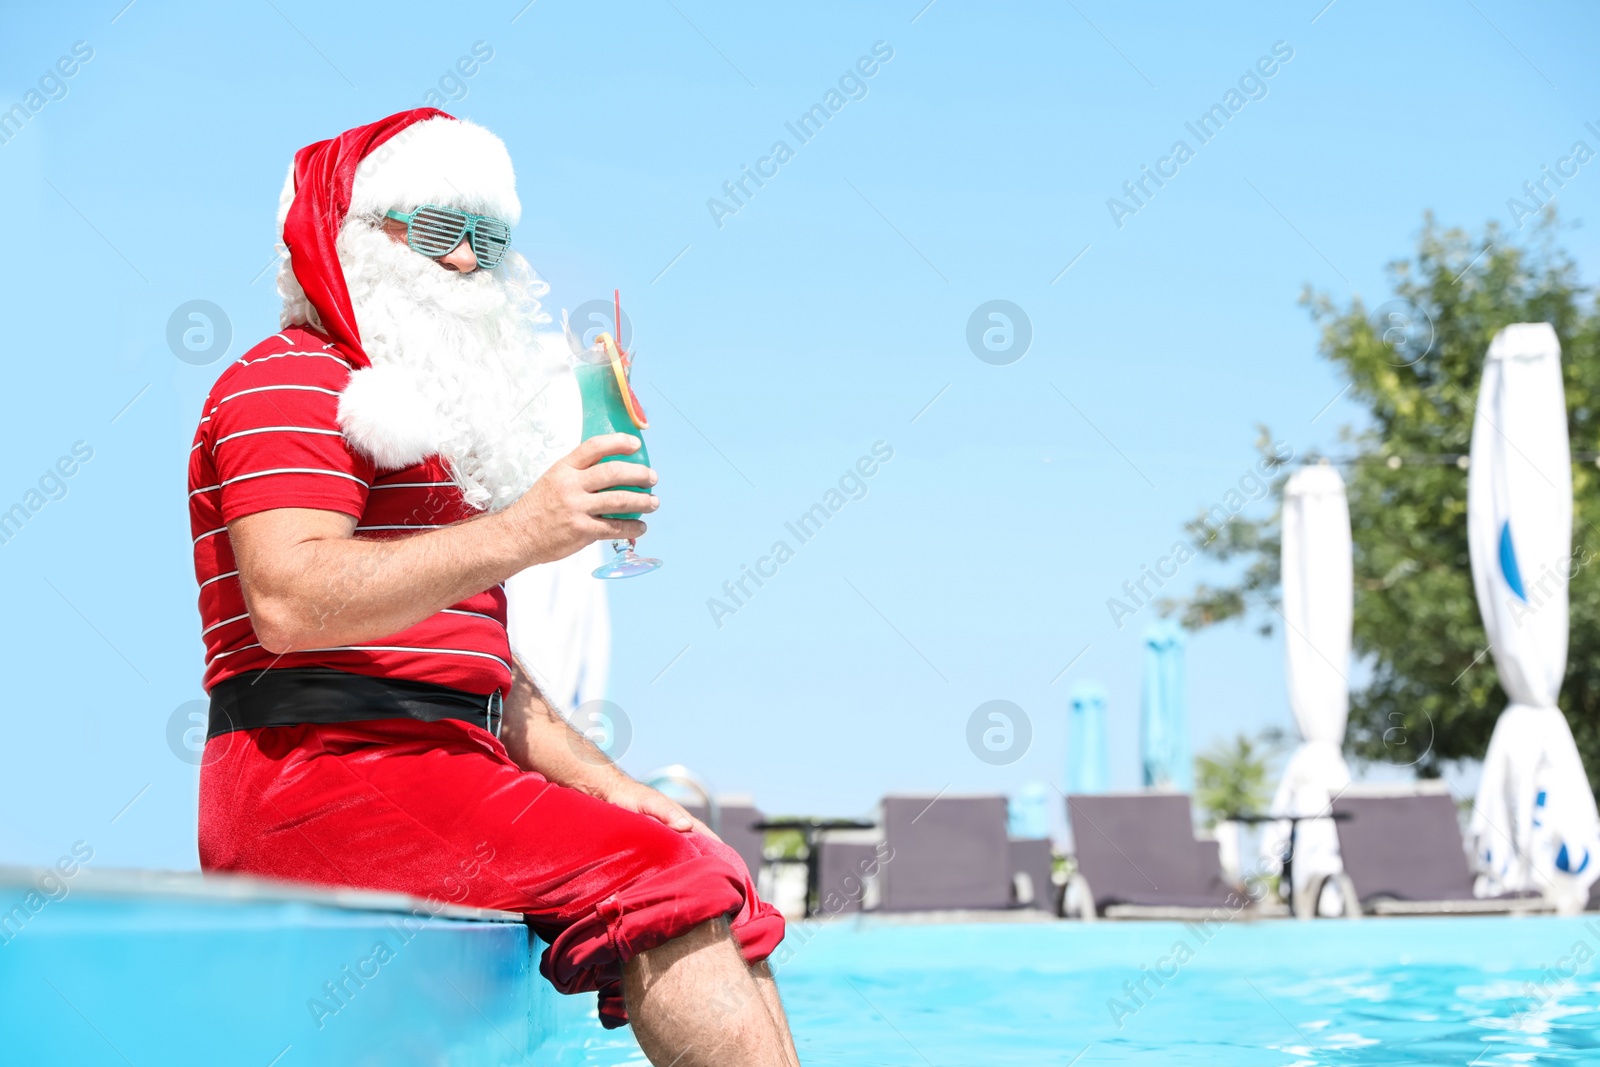 Photo of Authentic Santa Claus with cocktail near pool at resort